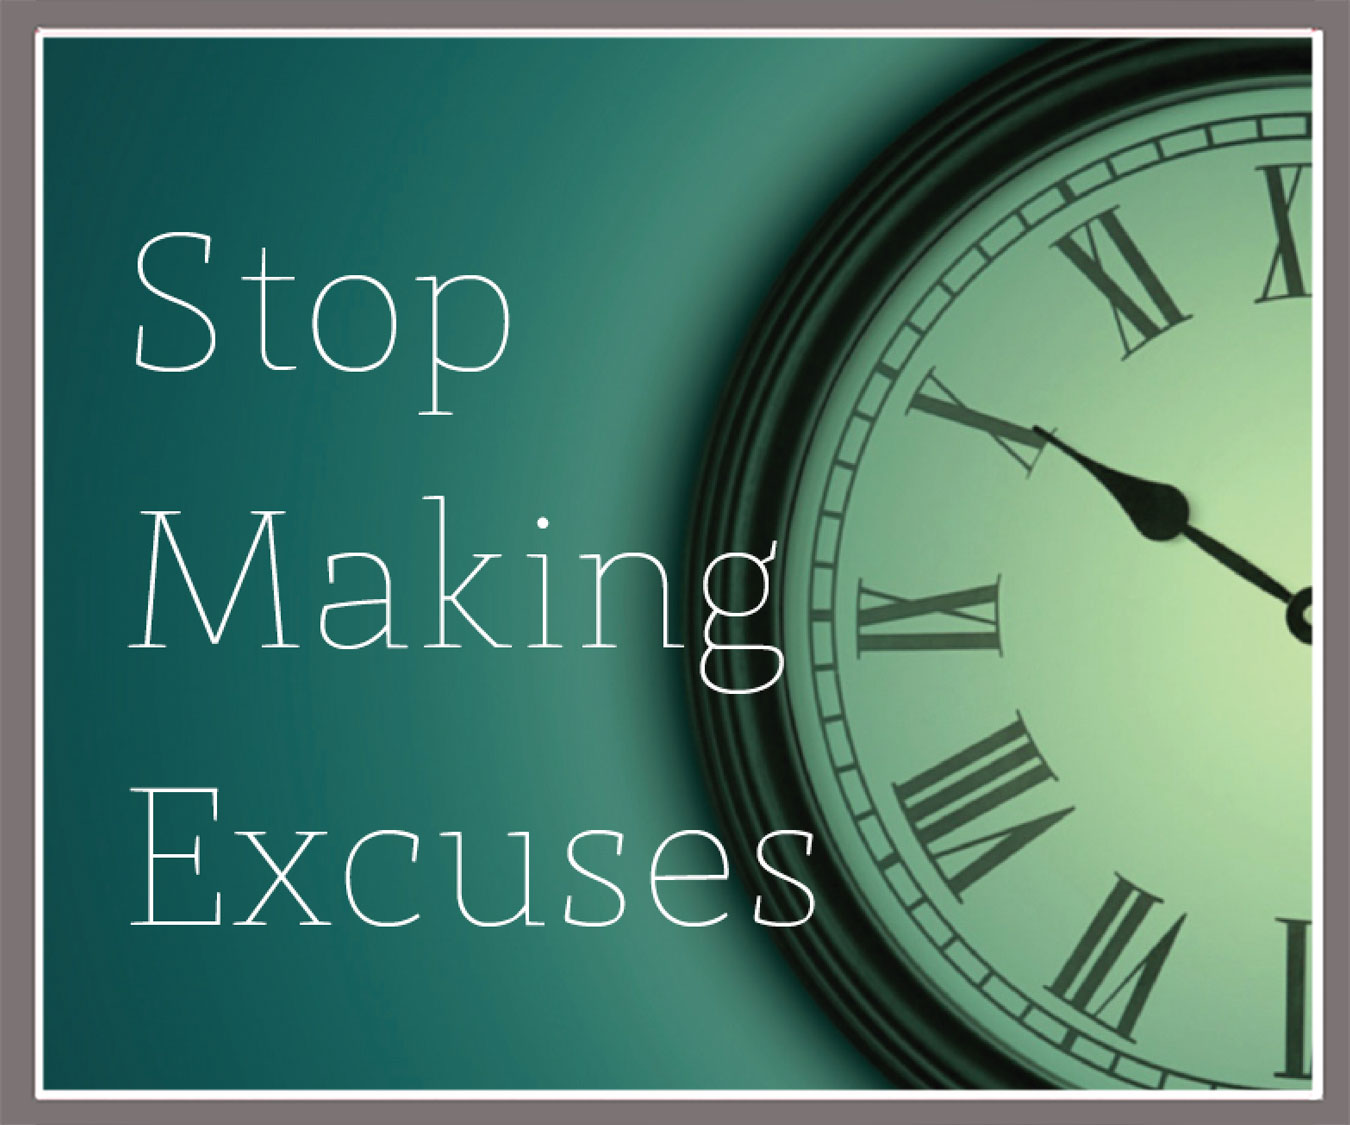 Excuses - Living Fit Lifestyle